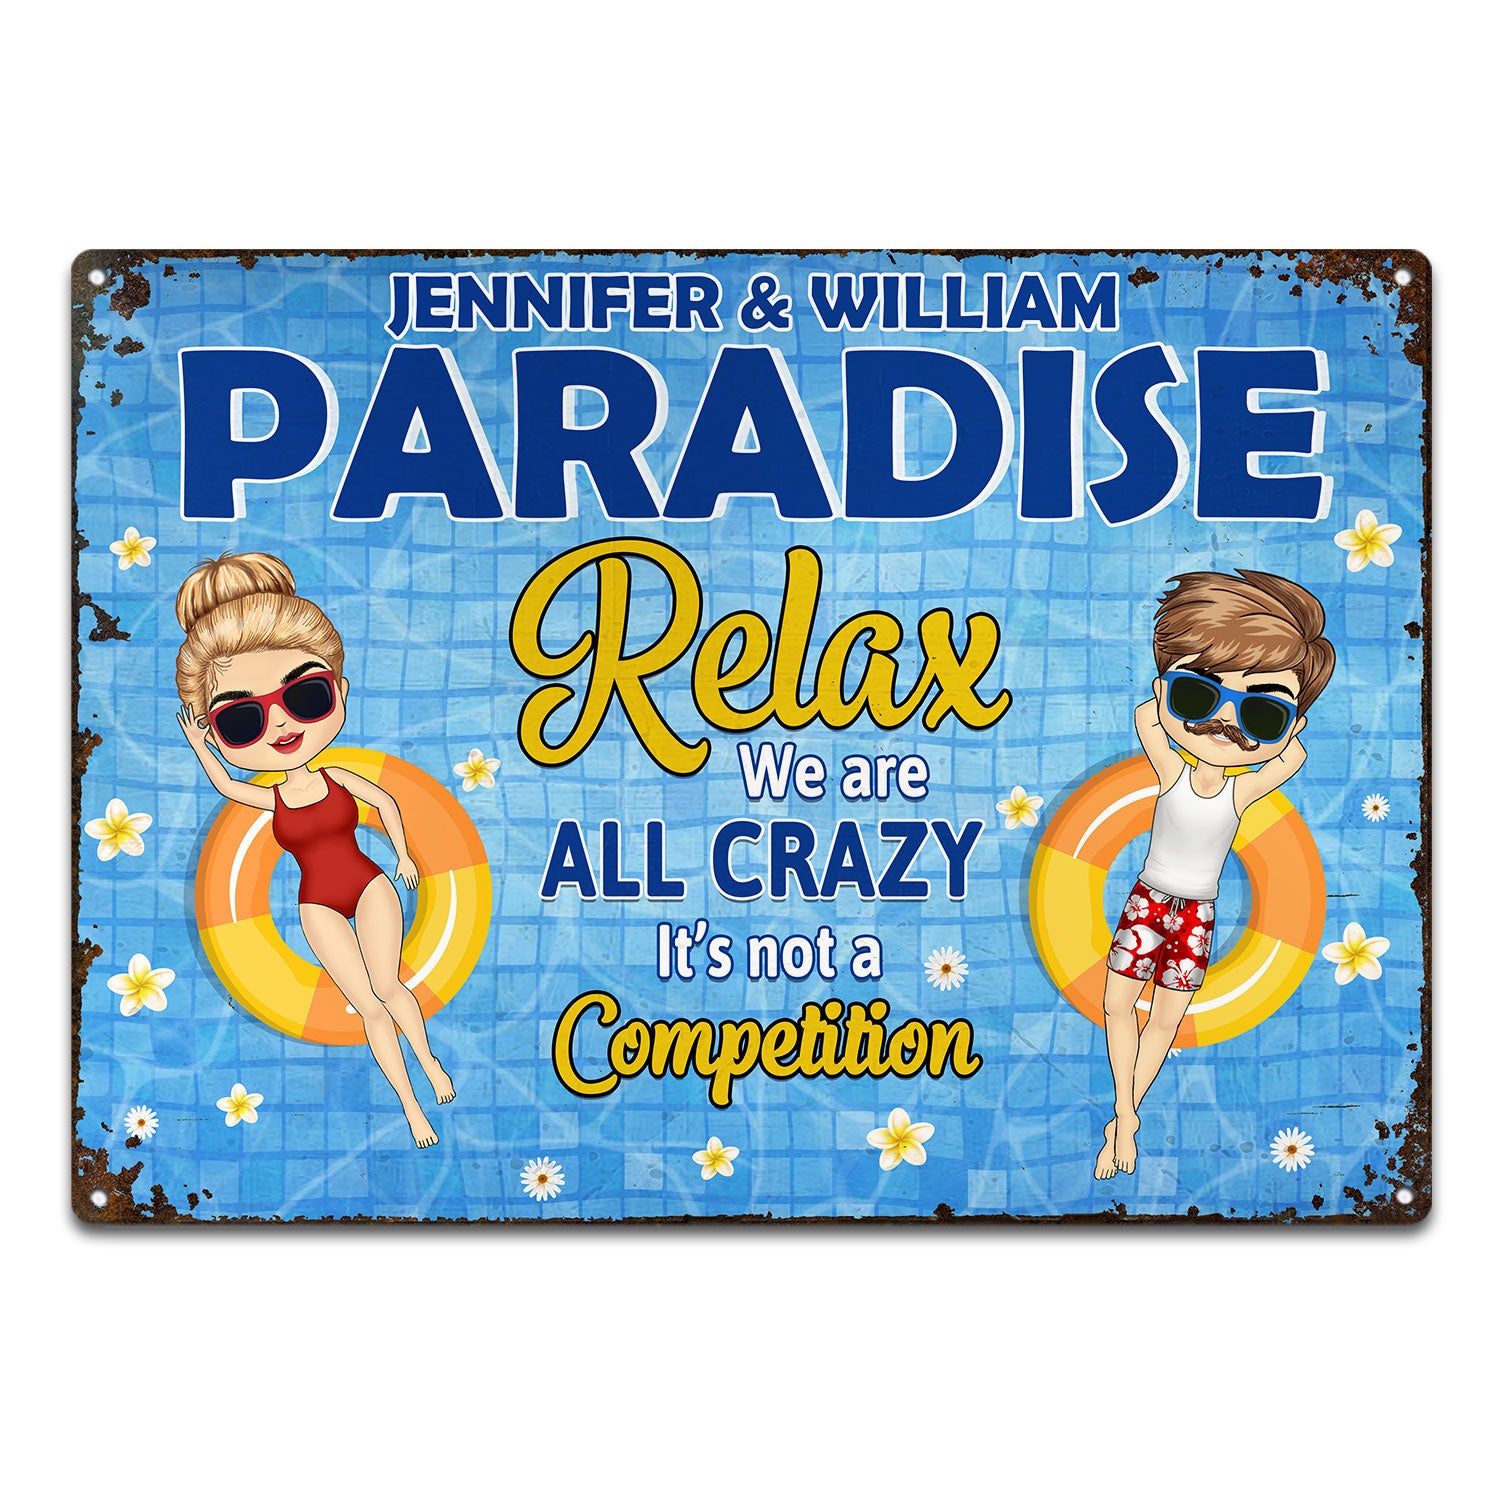 Relax We Are All Crazy - Gift For Couples, Outdoor Home Decor For Pool, Poolside, Backyard - Personalized Custom Classic Metal Signs